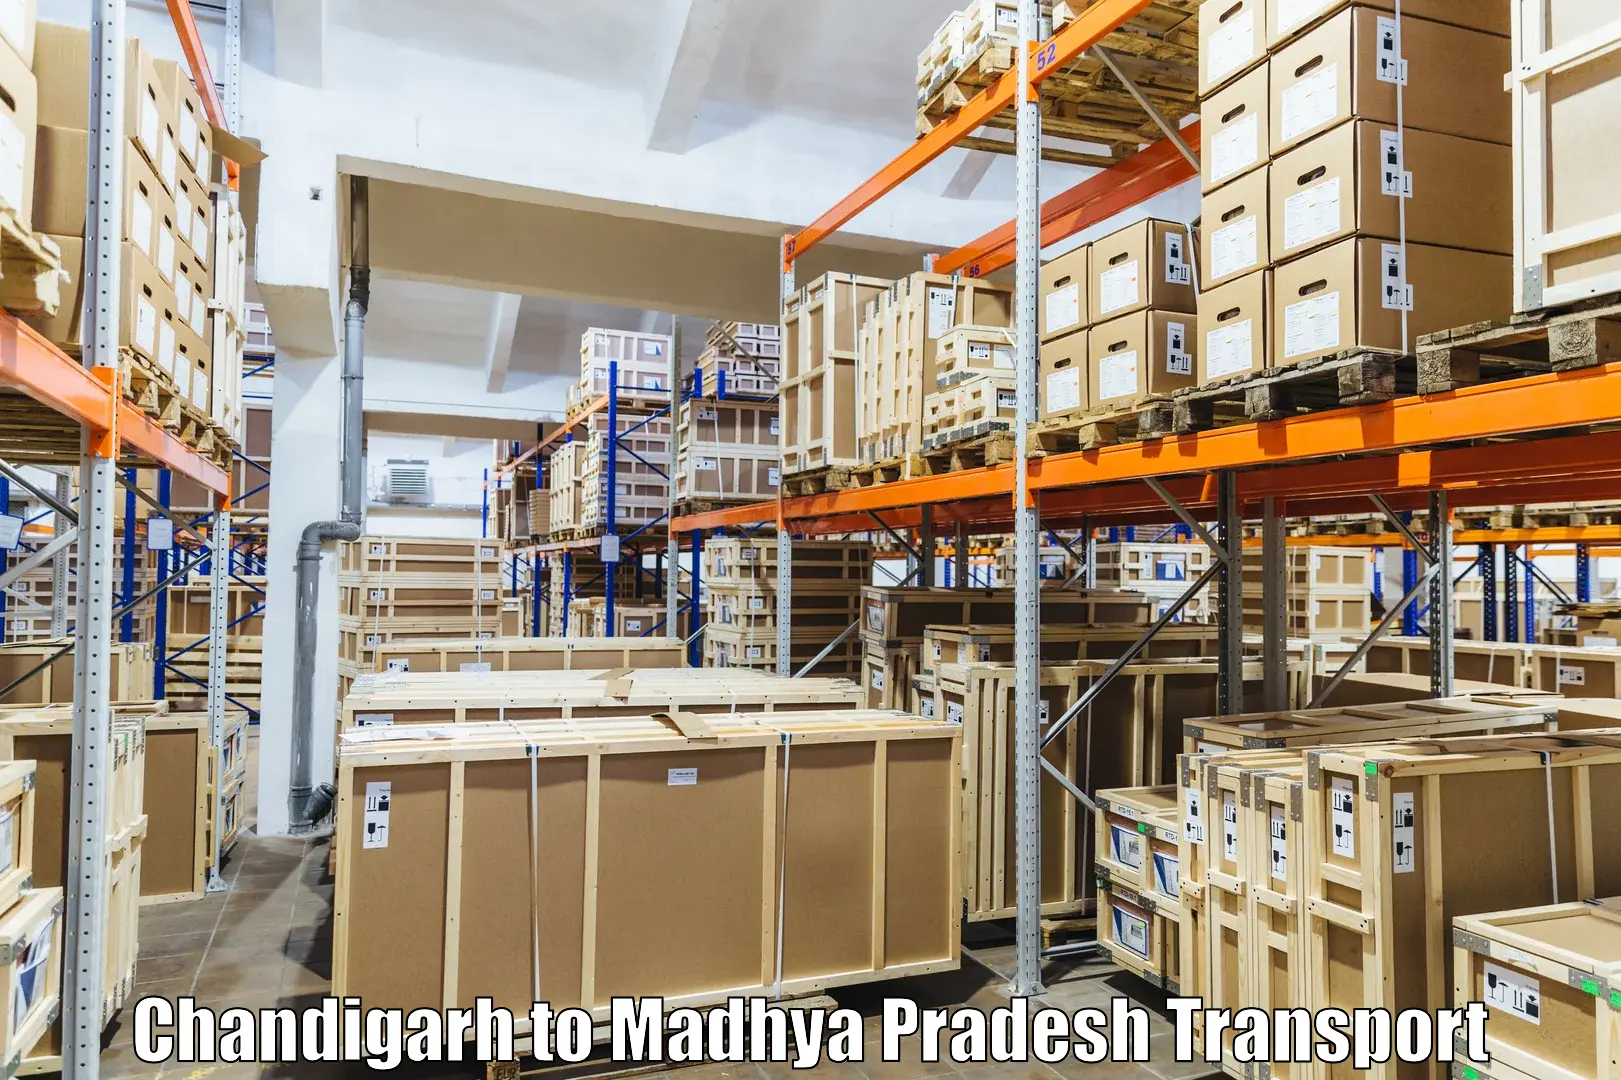 Lorry transport service in Chandigarh to Indore